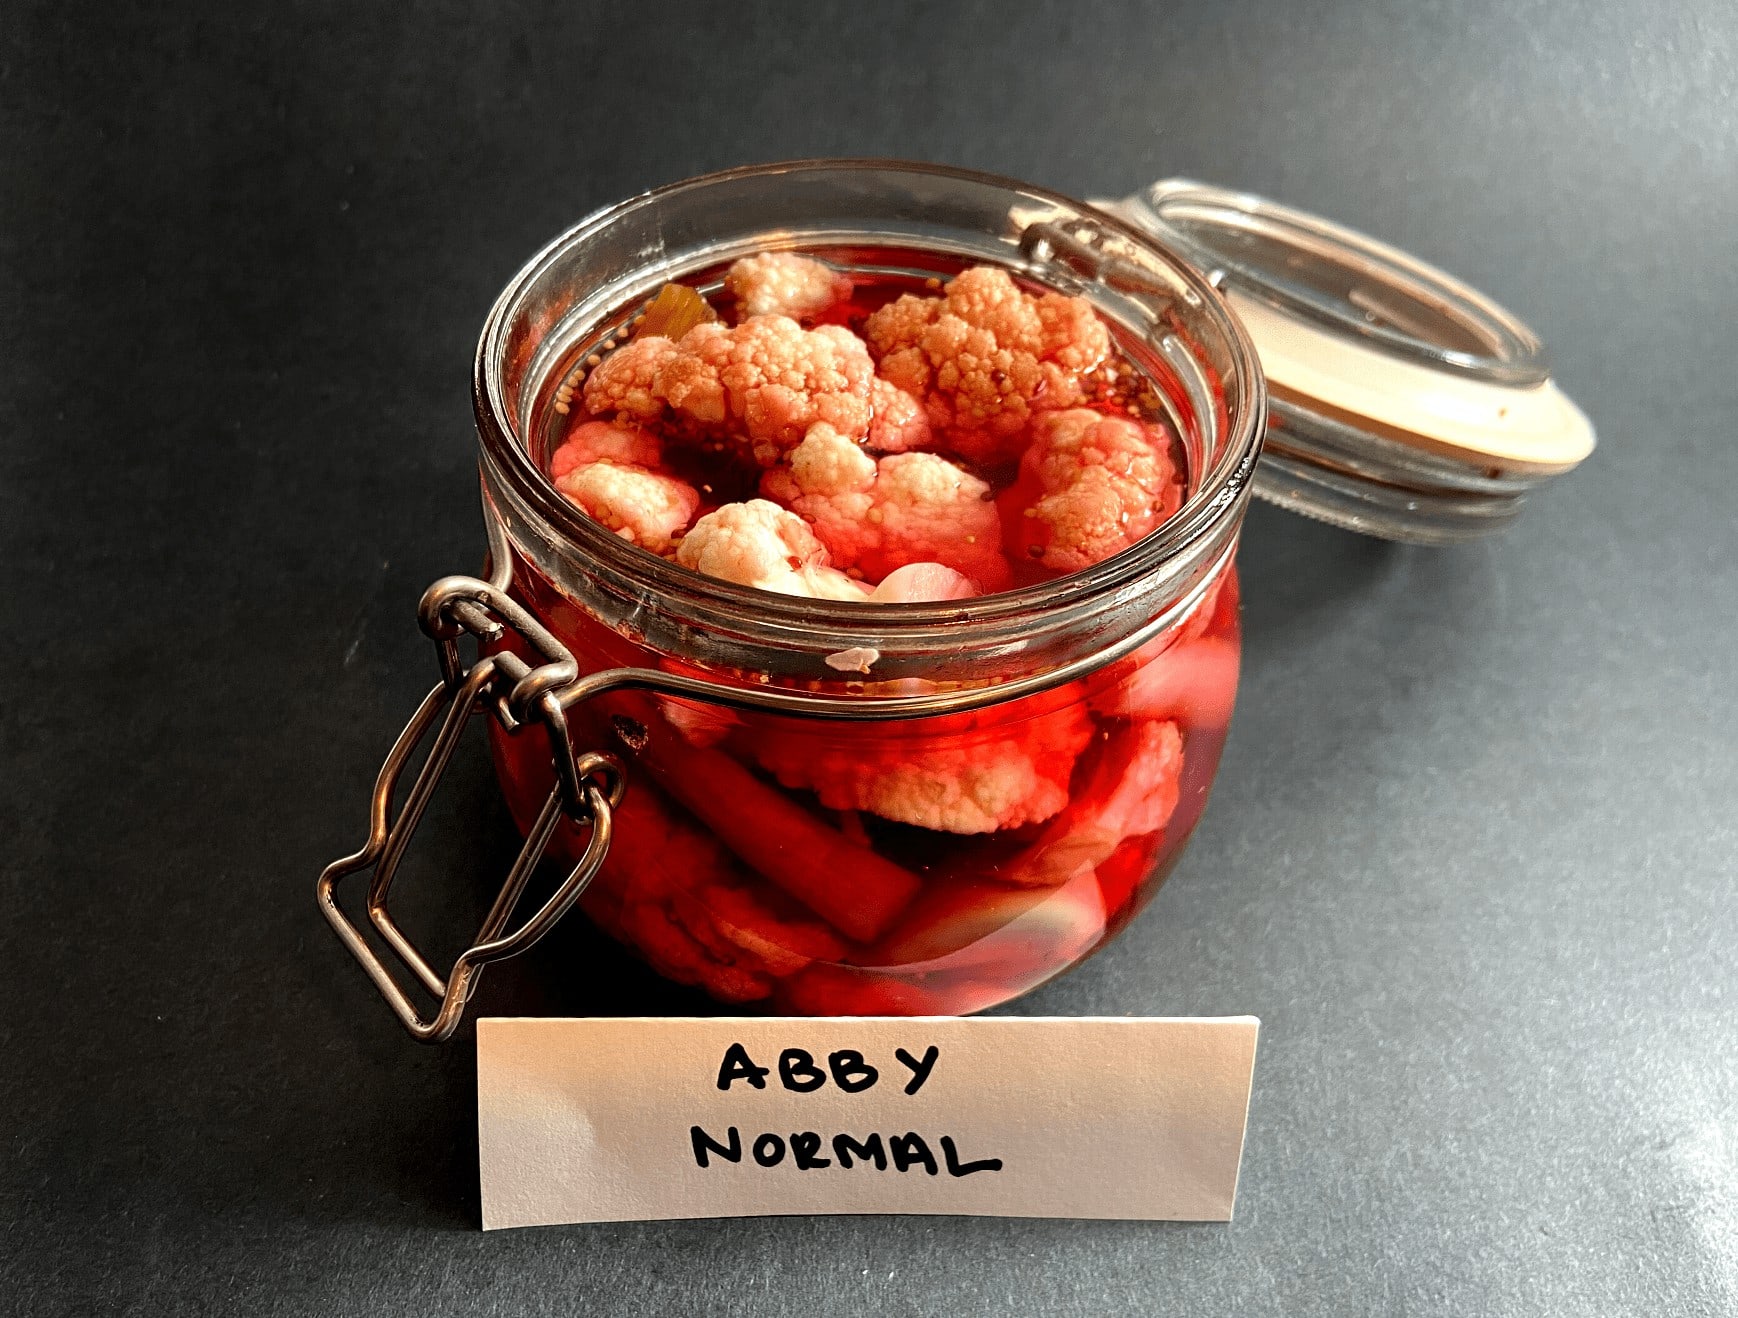 abby normal